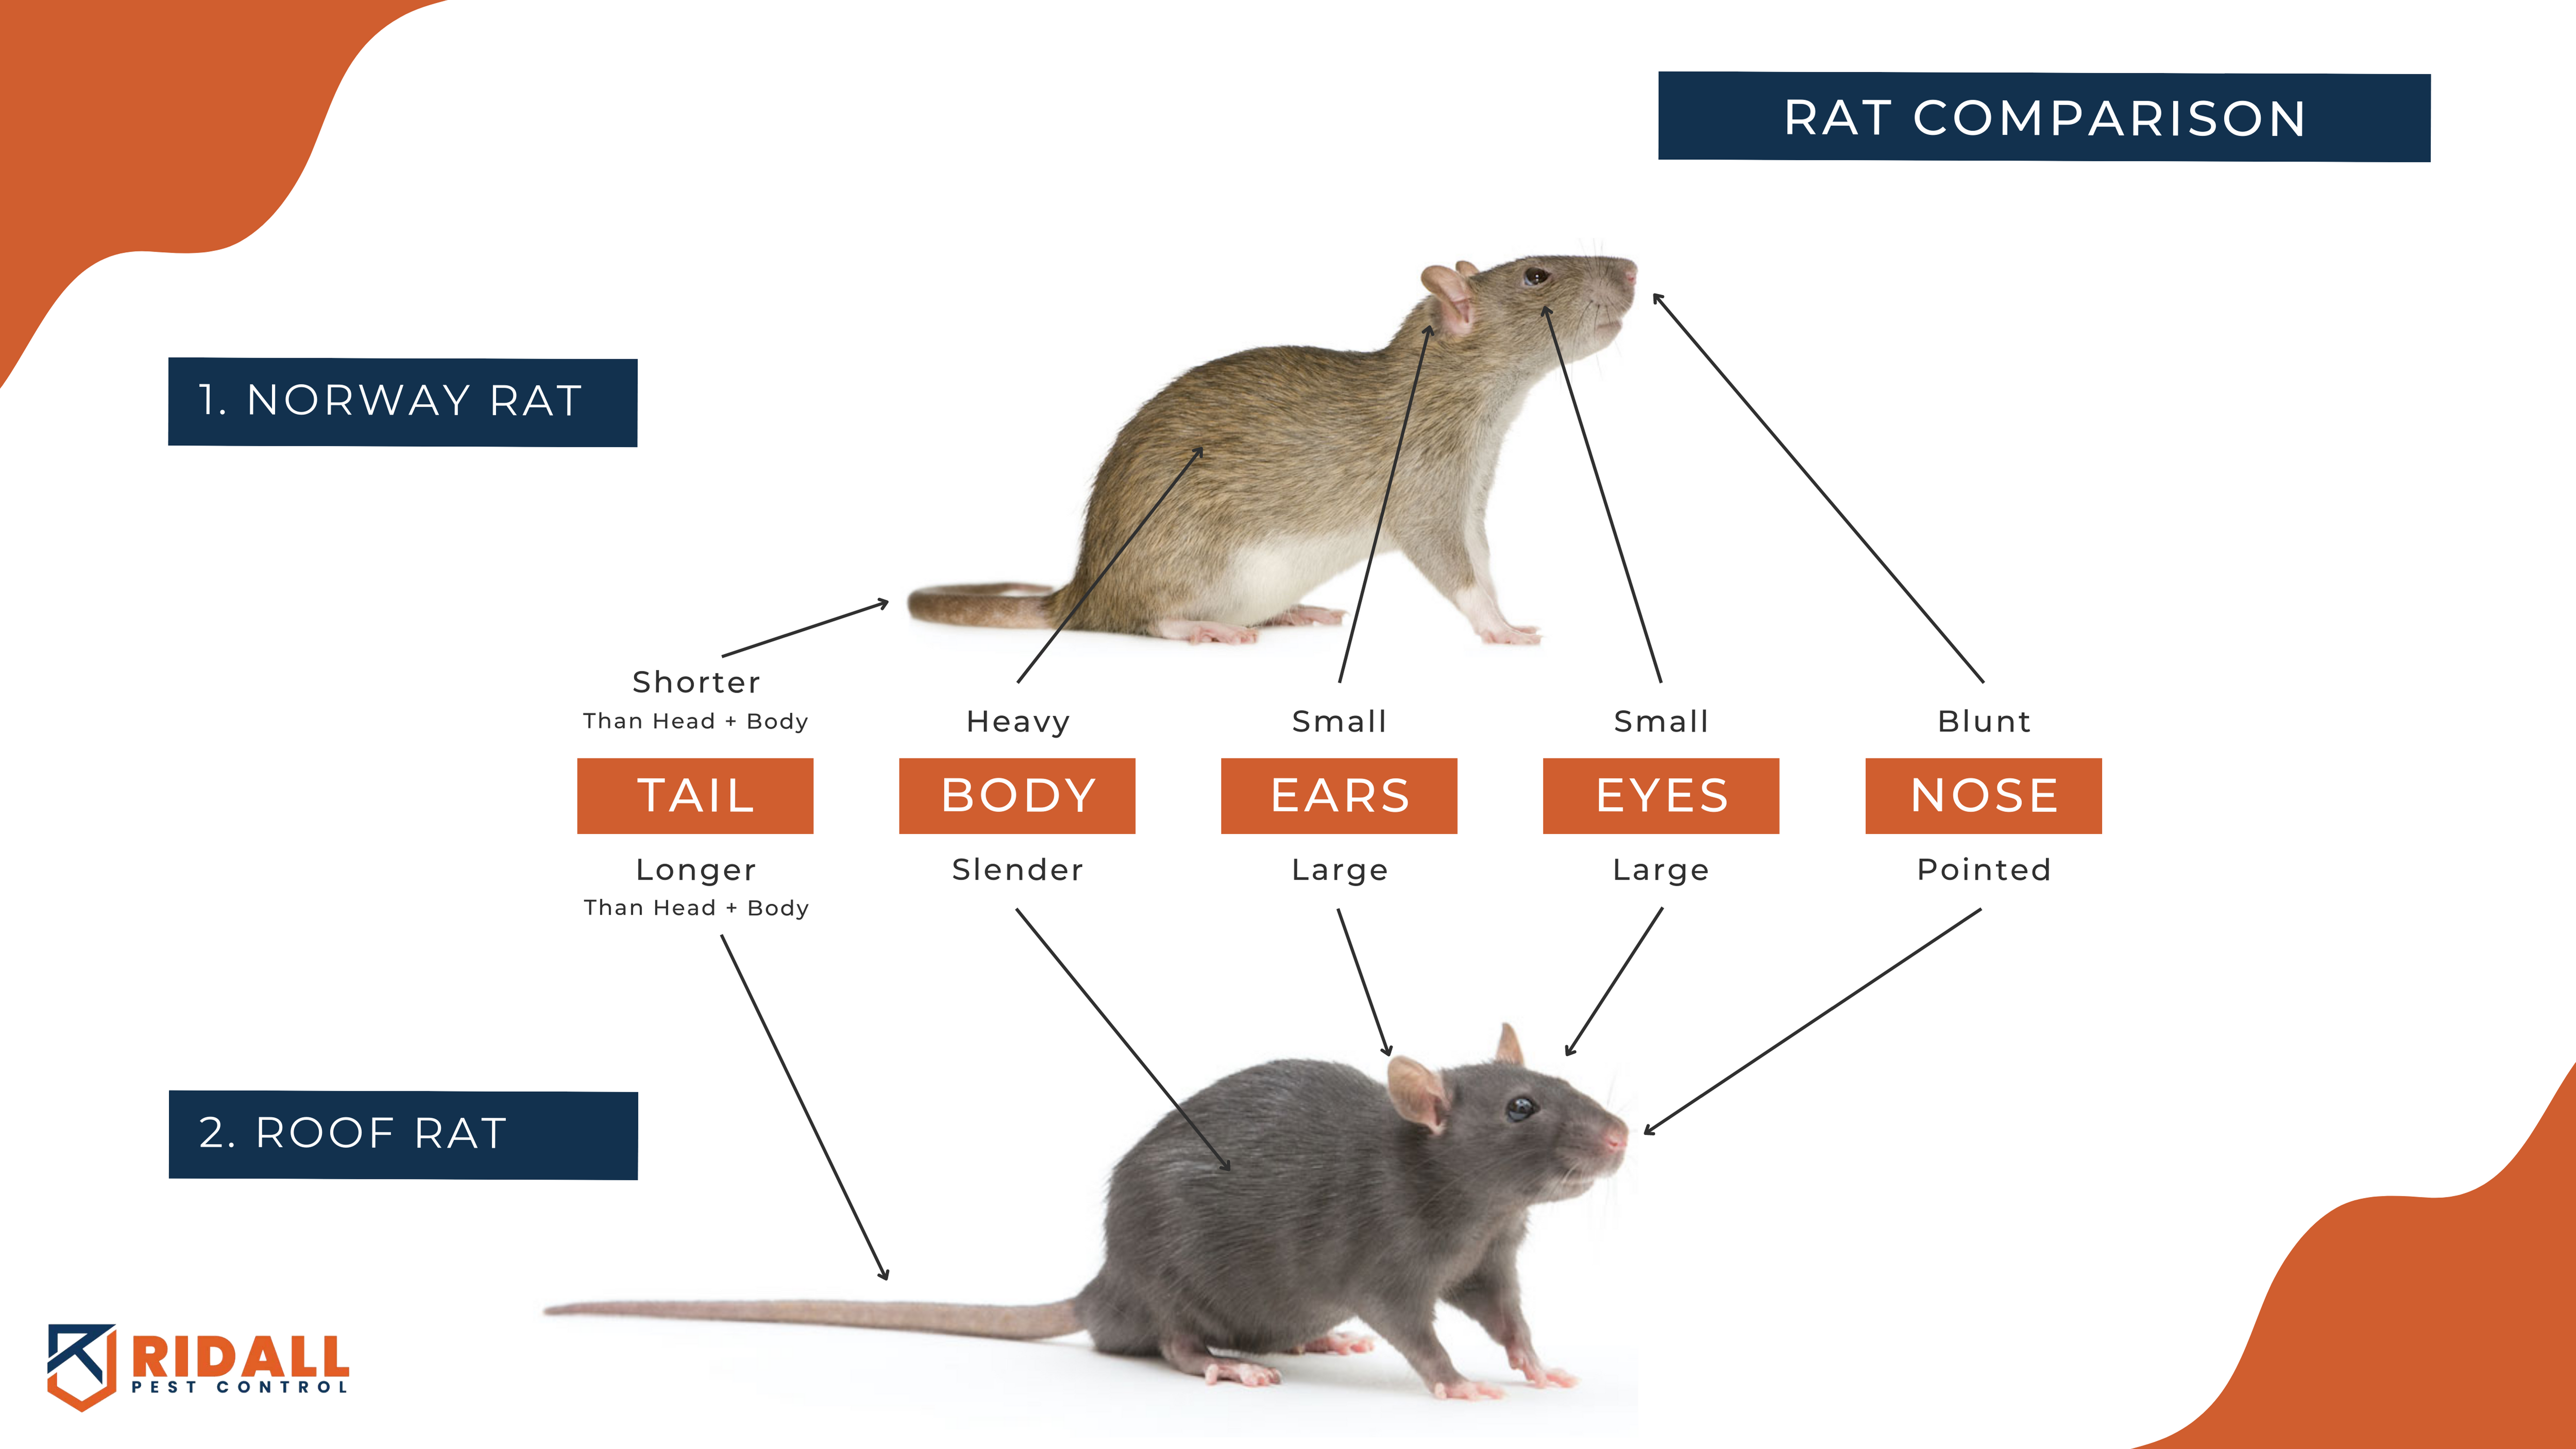 Typical Rats Species in Vancouver